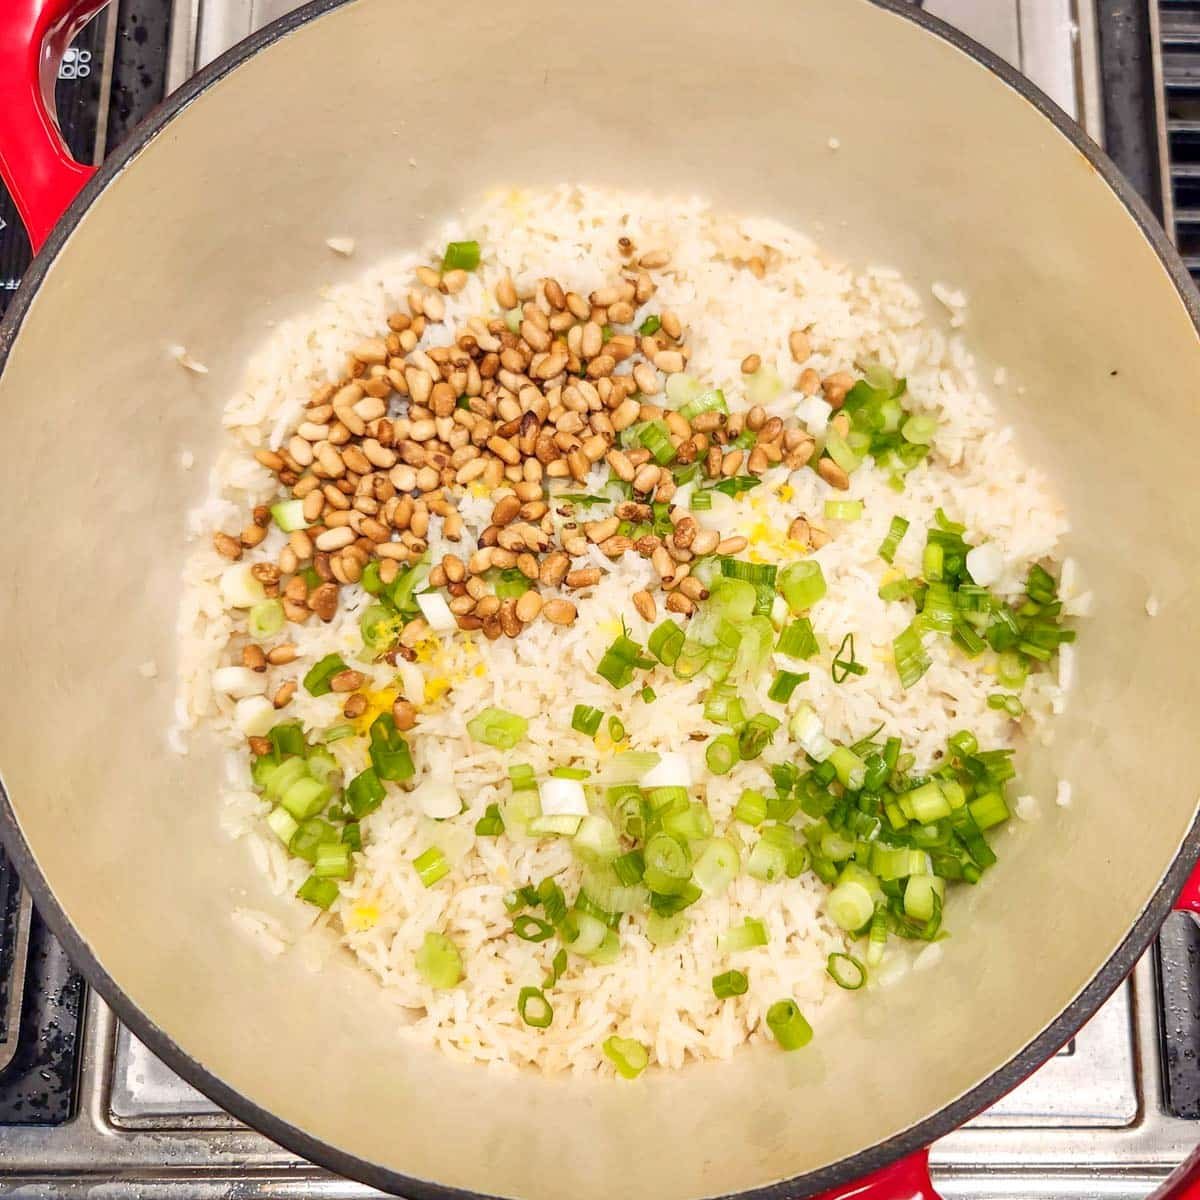 pine nuts, green onions and lemon zest over cooked basmati rice